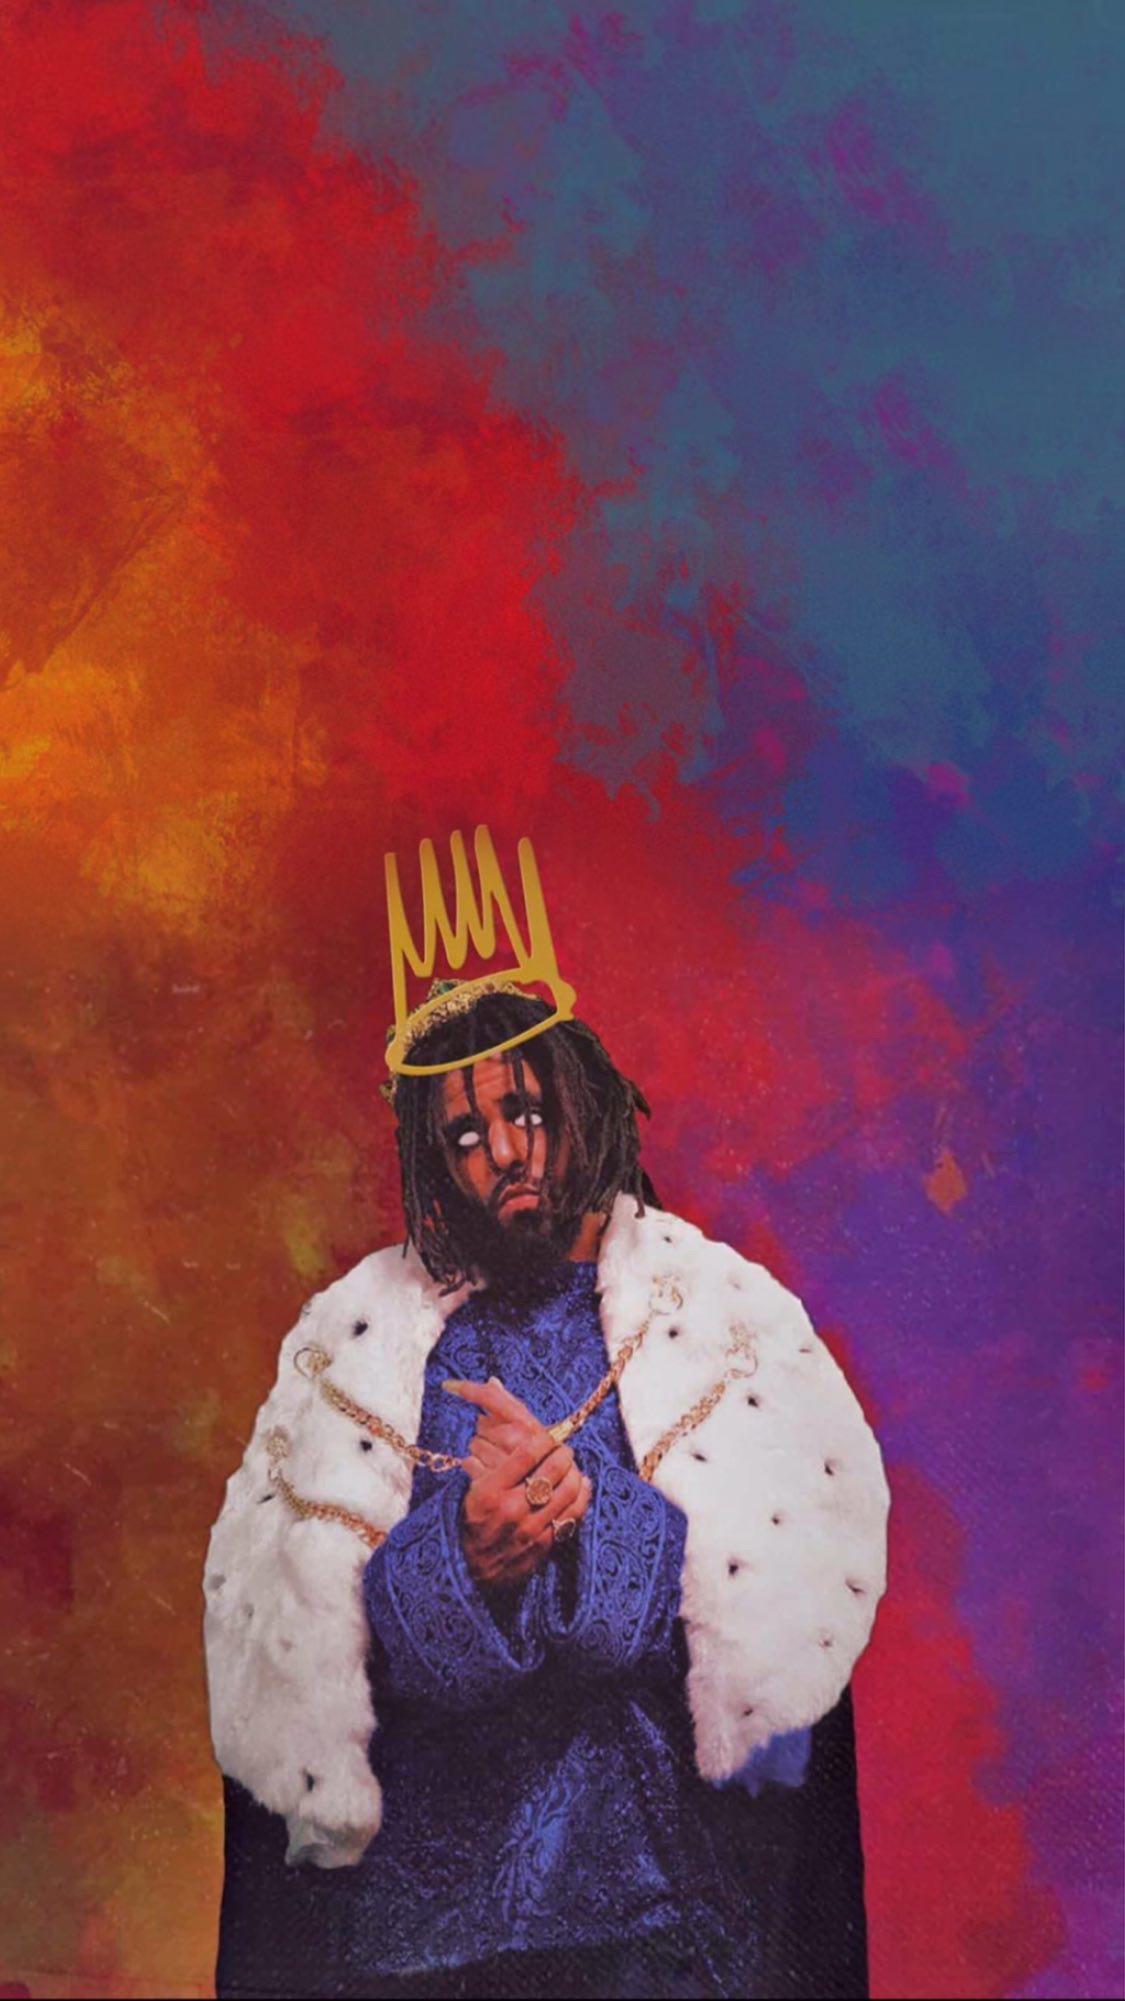 journey of the lamb j cole download